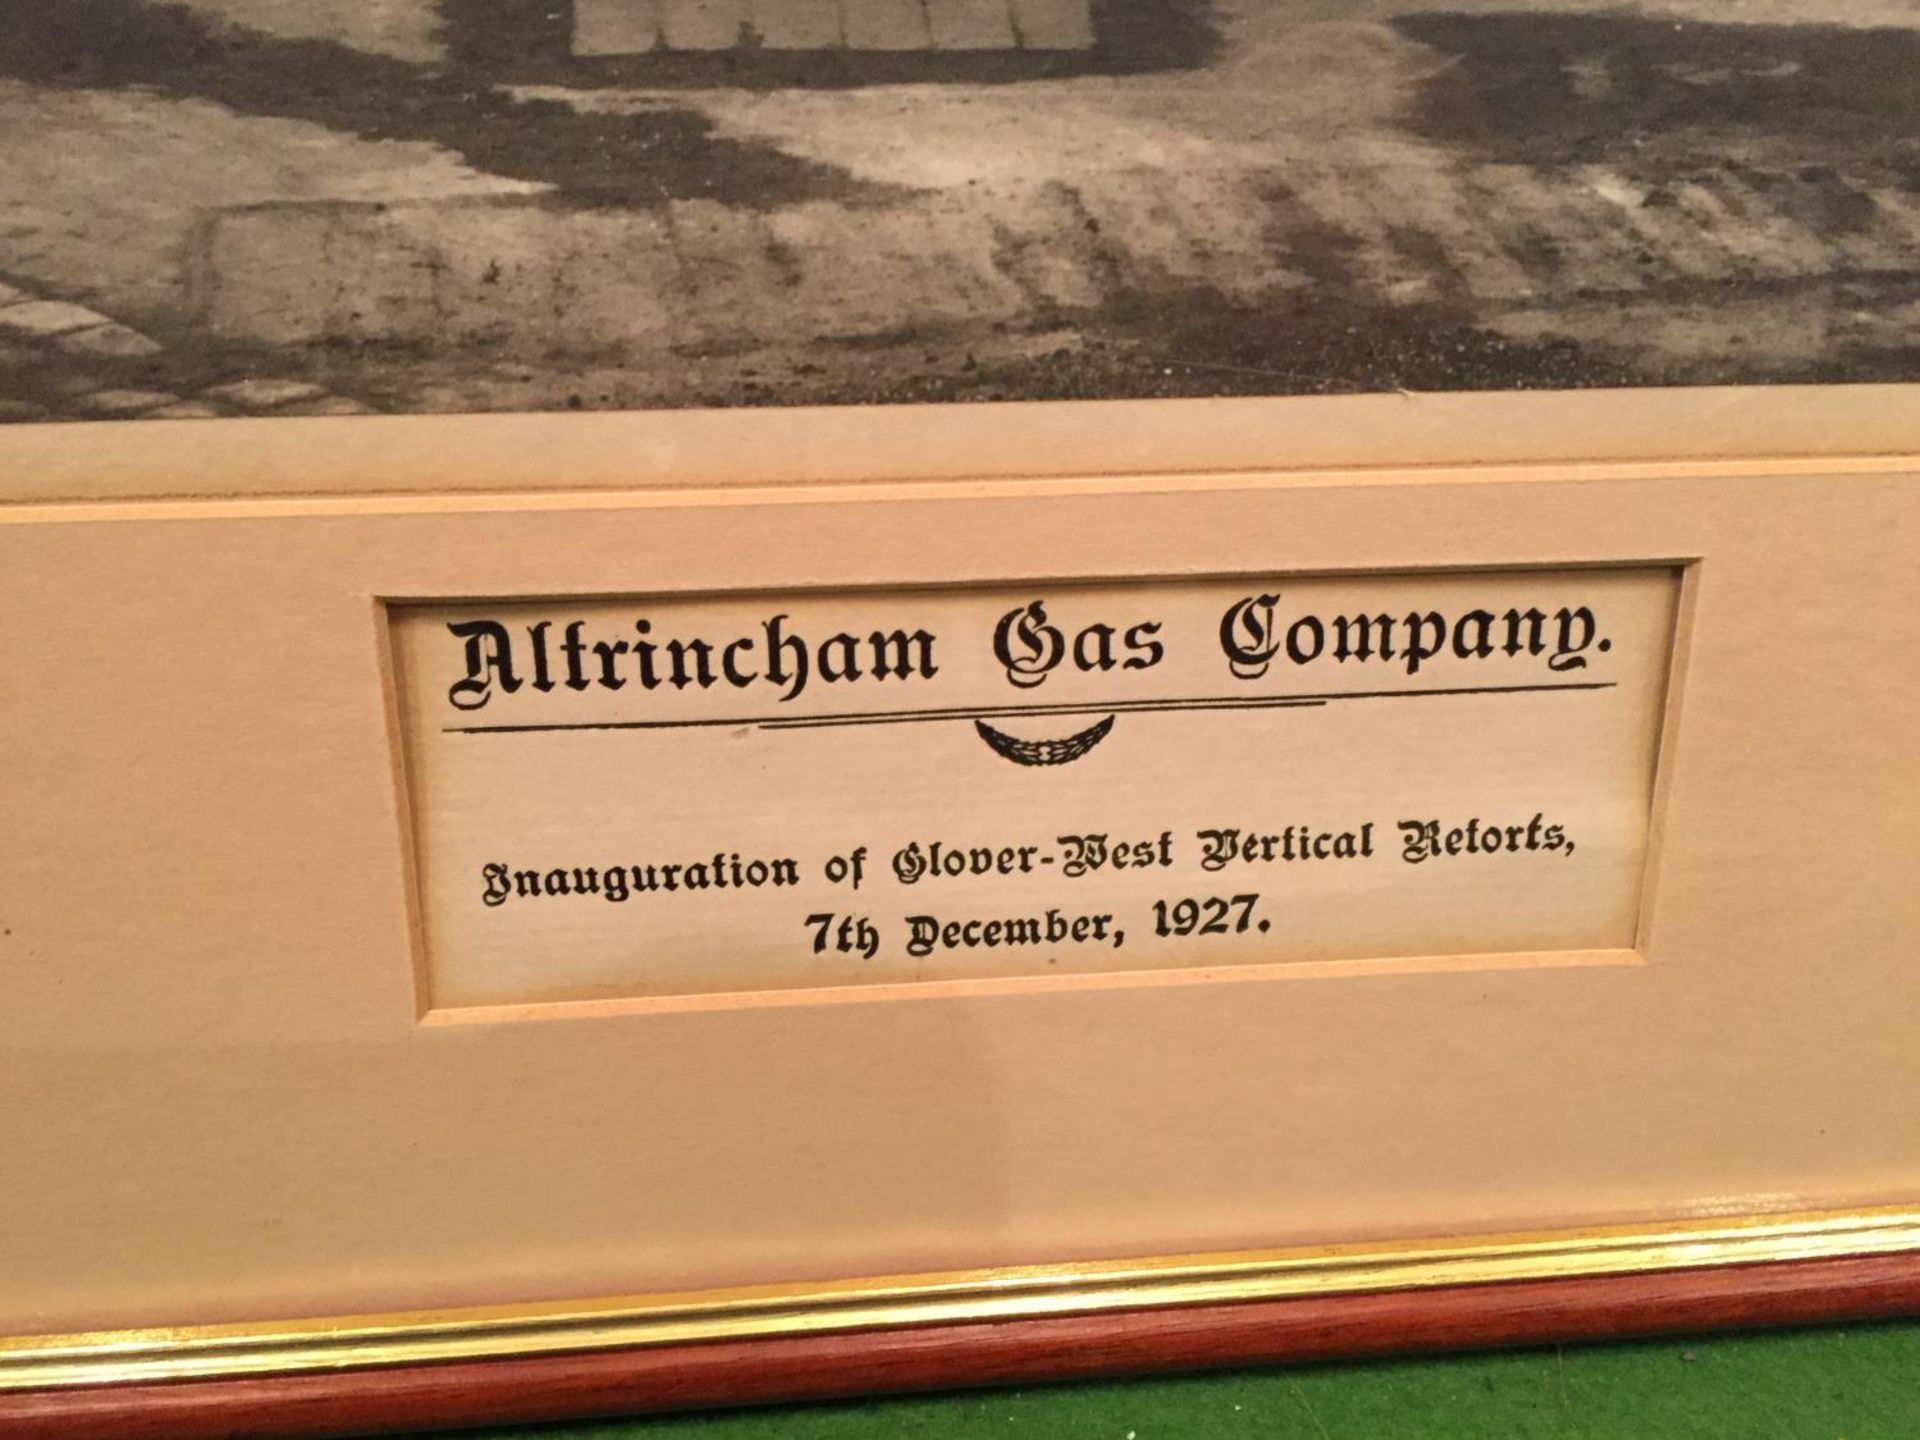 A FRAMED PHOTOGRAPH OF ALTRINCHAM GAS COMPANY DATED 7TH DECEMBER 1927 - Image 3 of 3